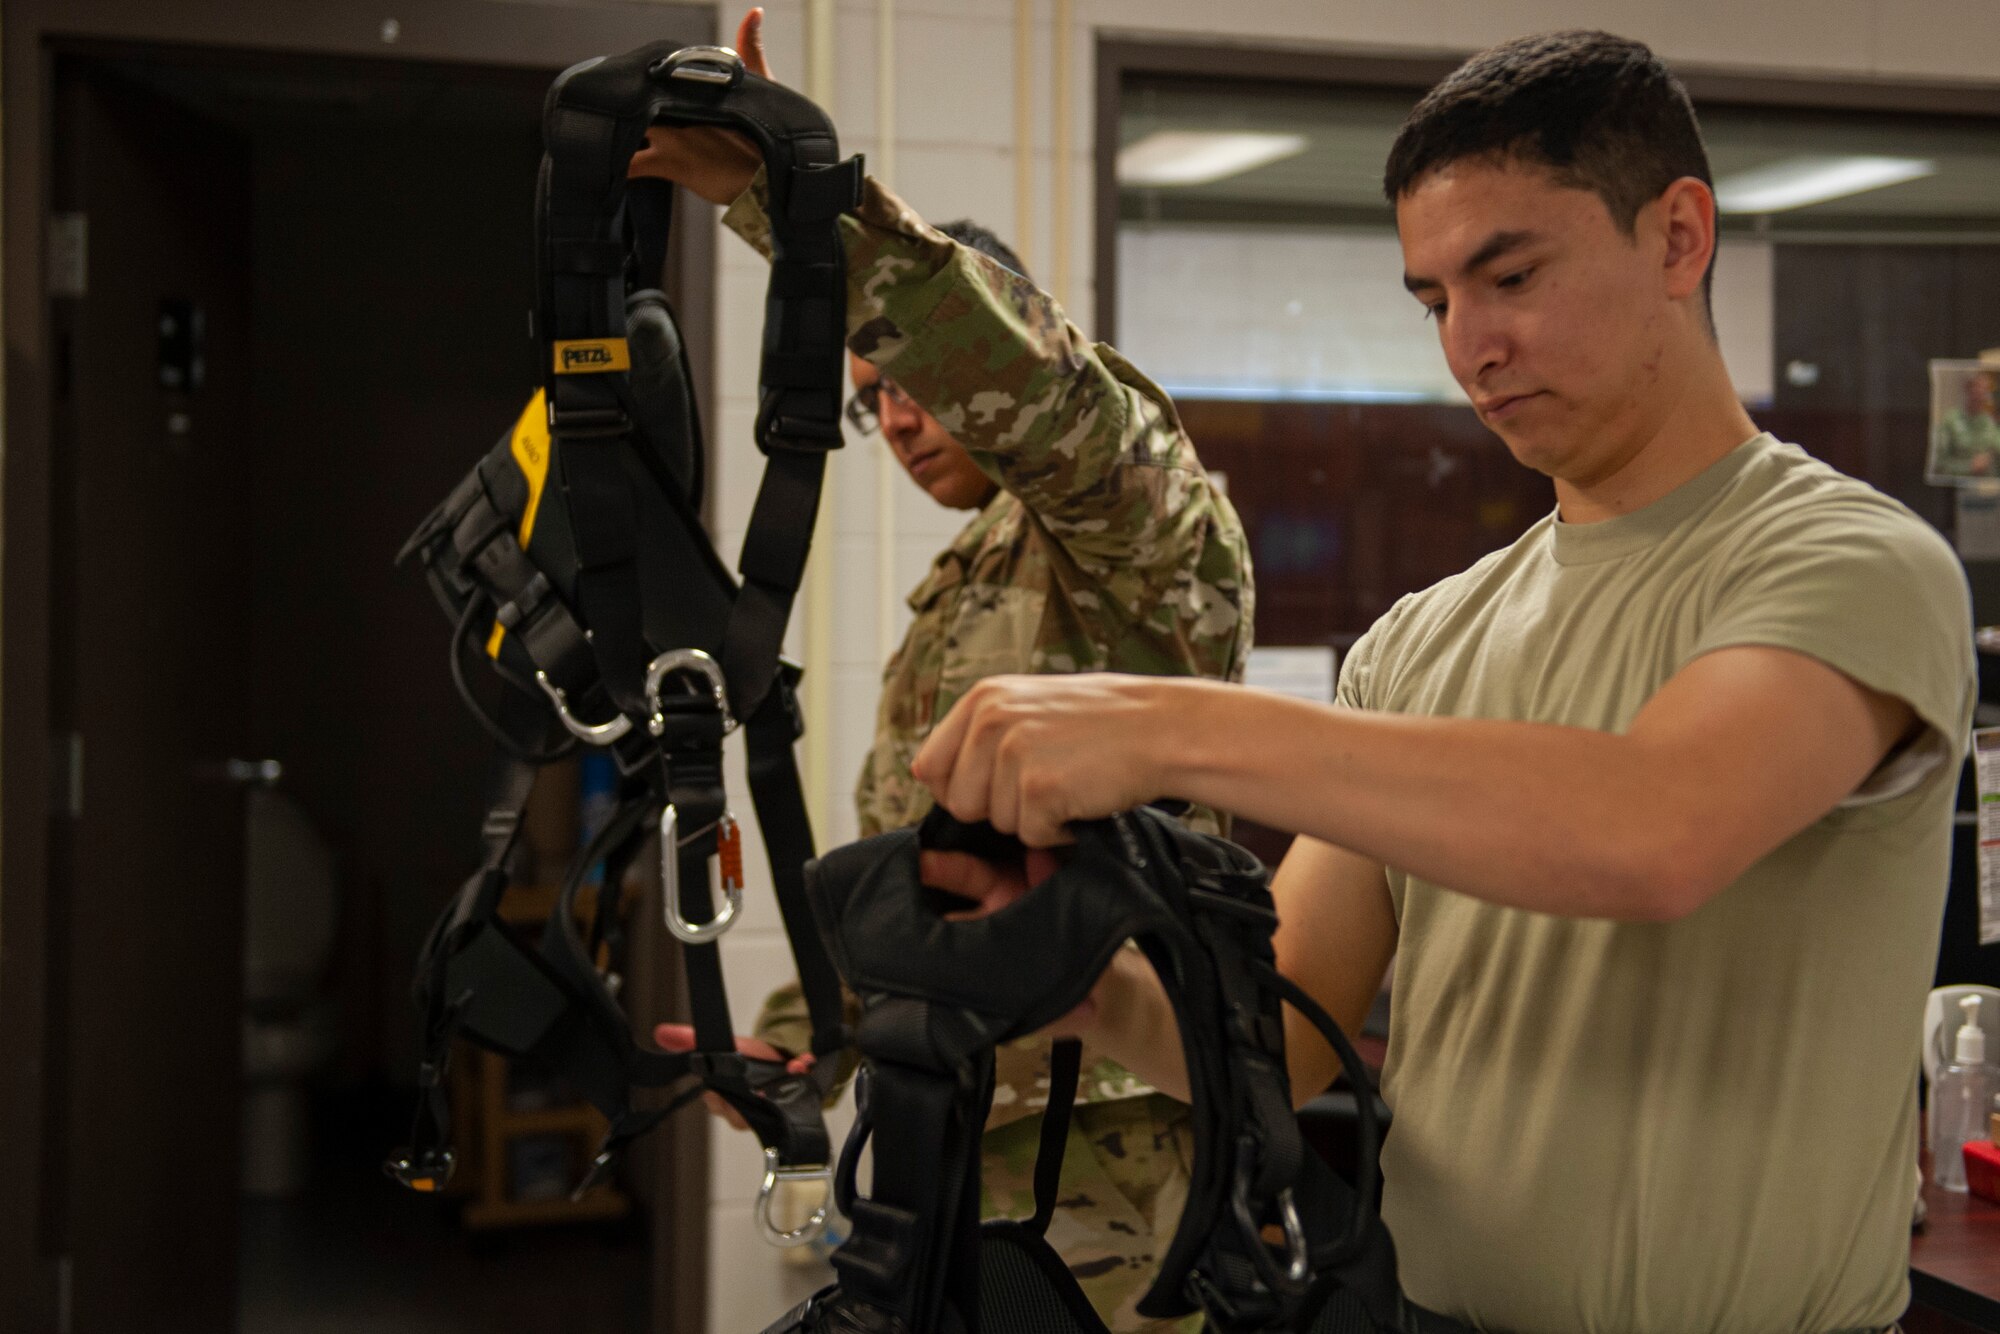 A photo of Airmen inspecting gear before training